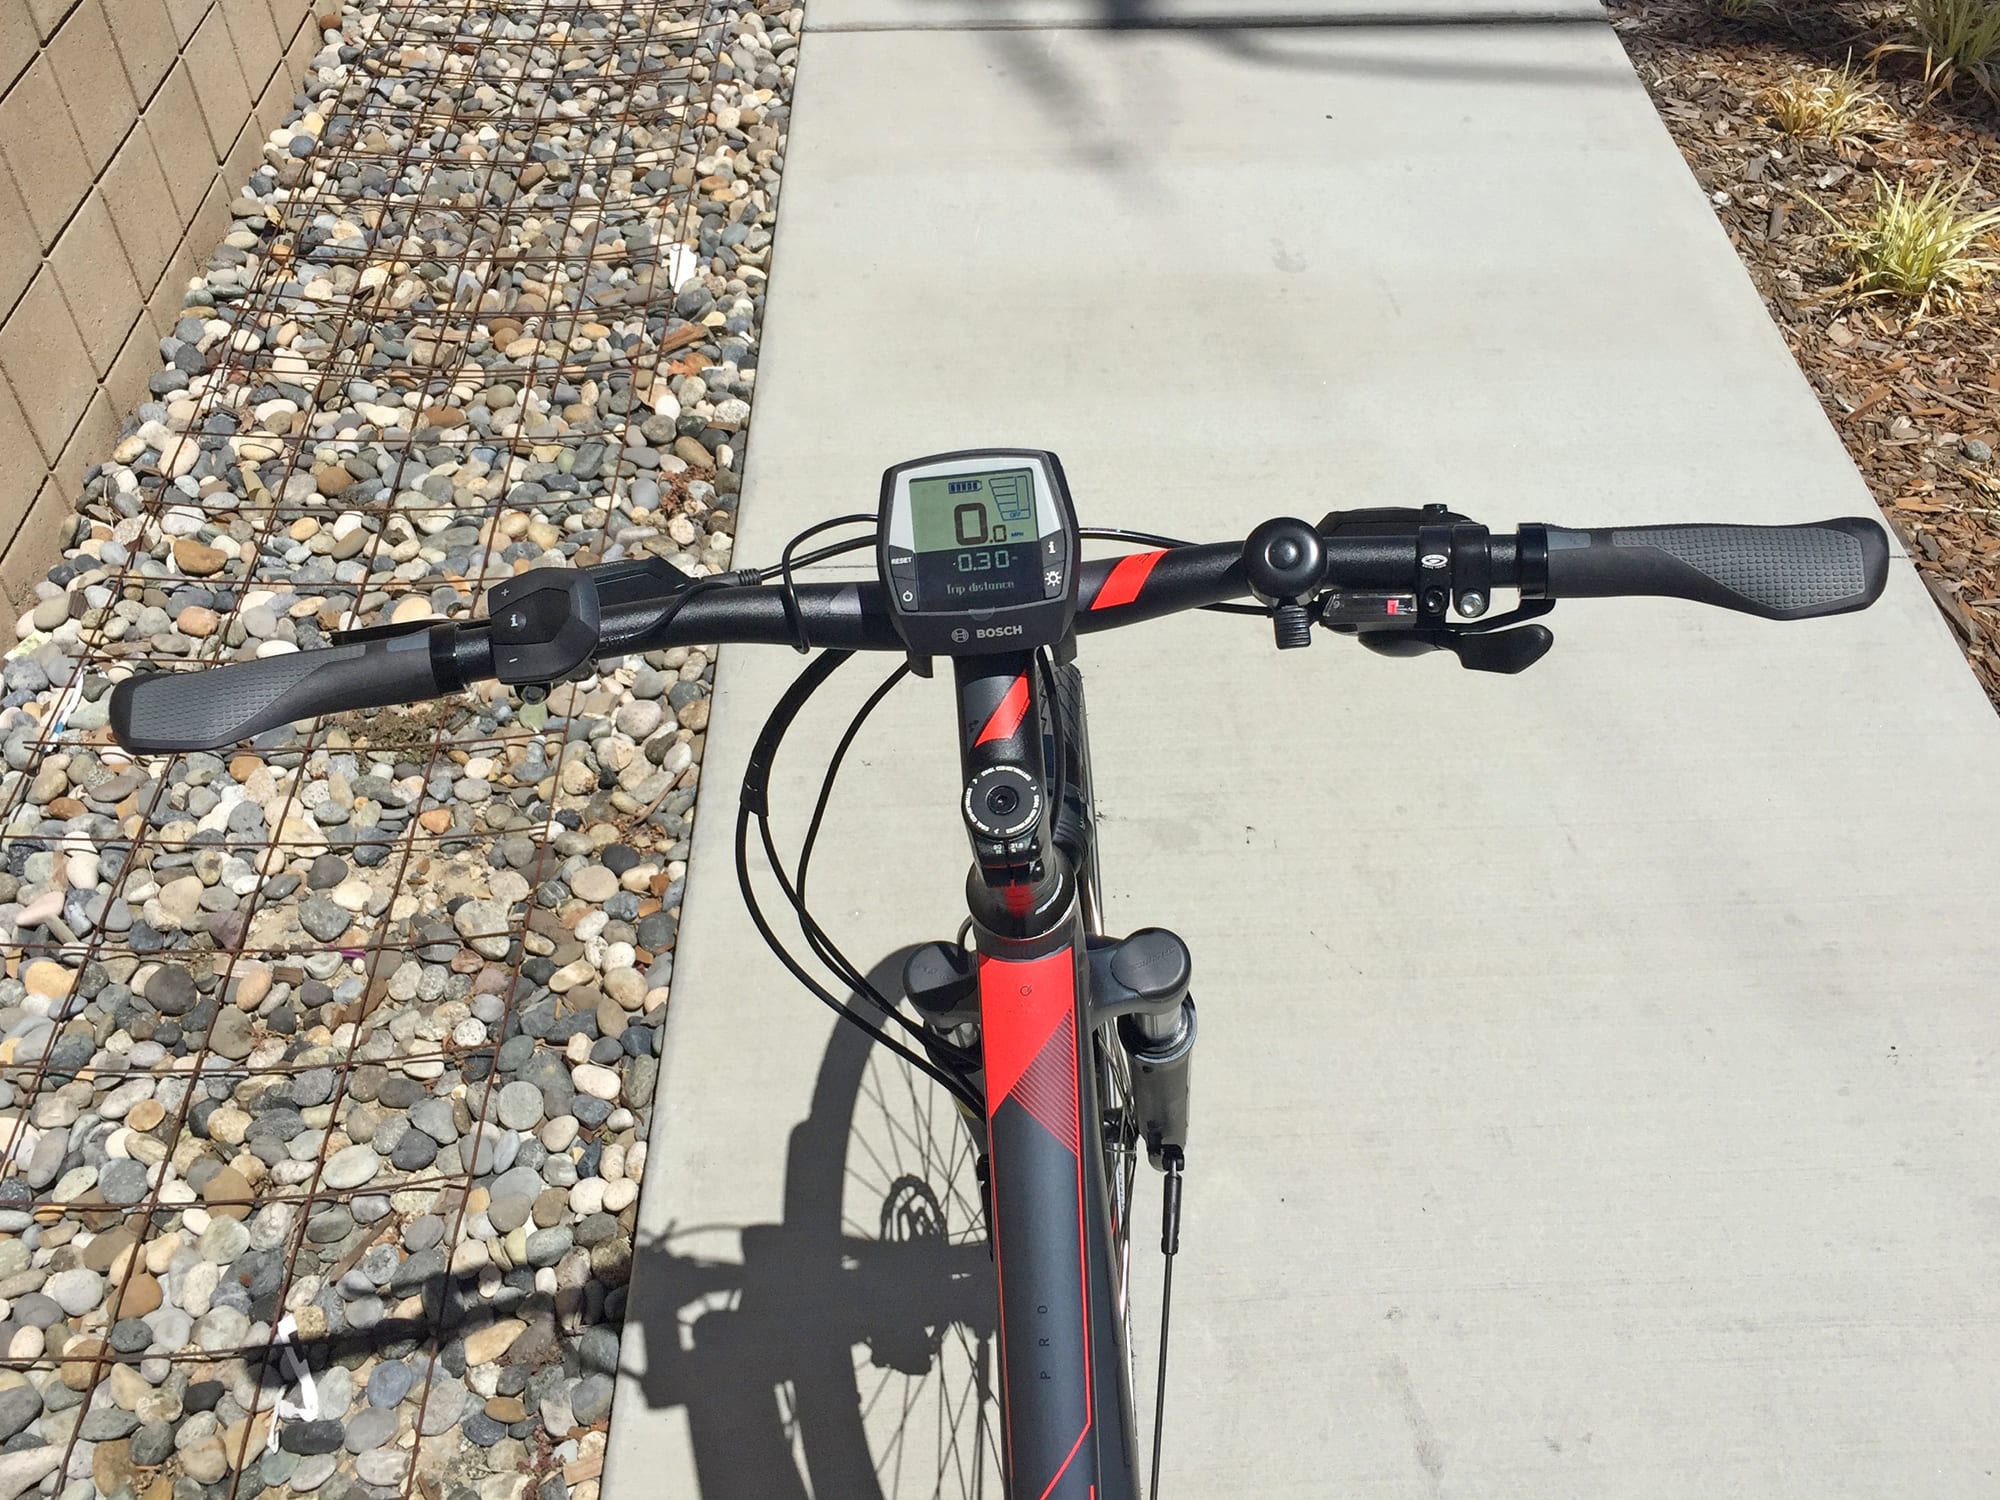 cube touring hybrid one 500 review